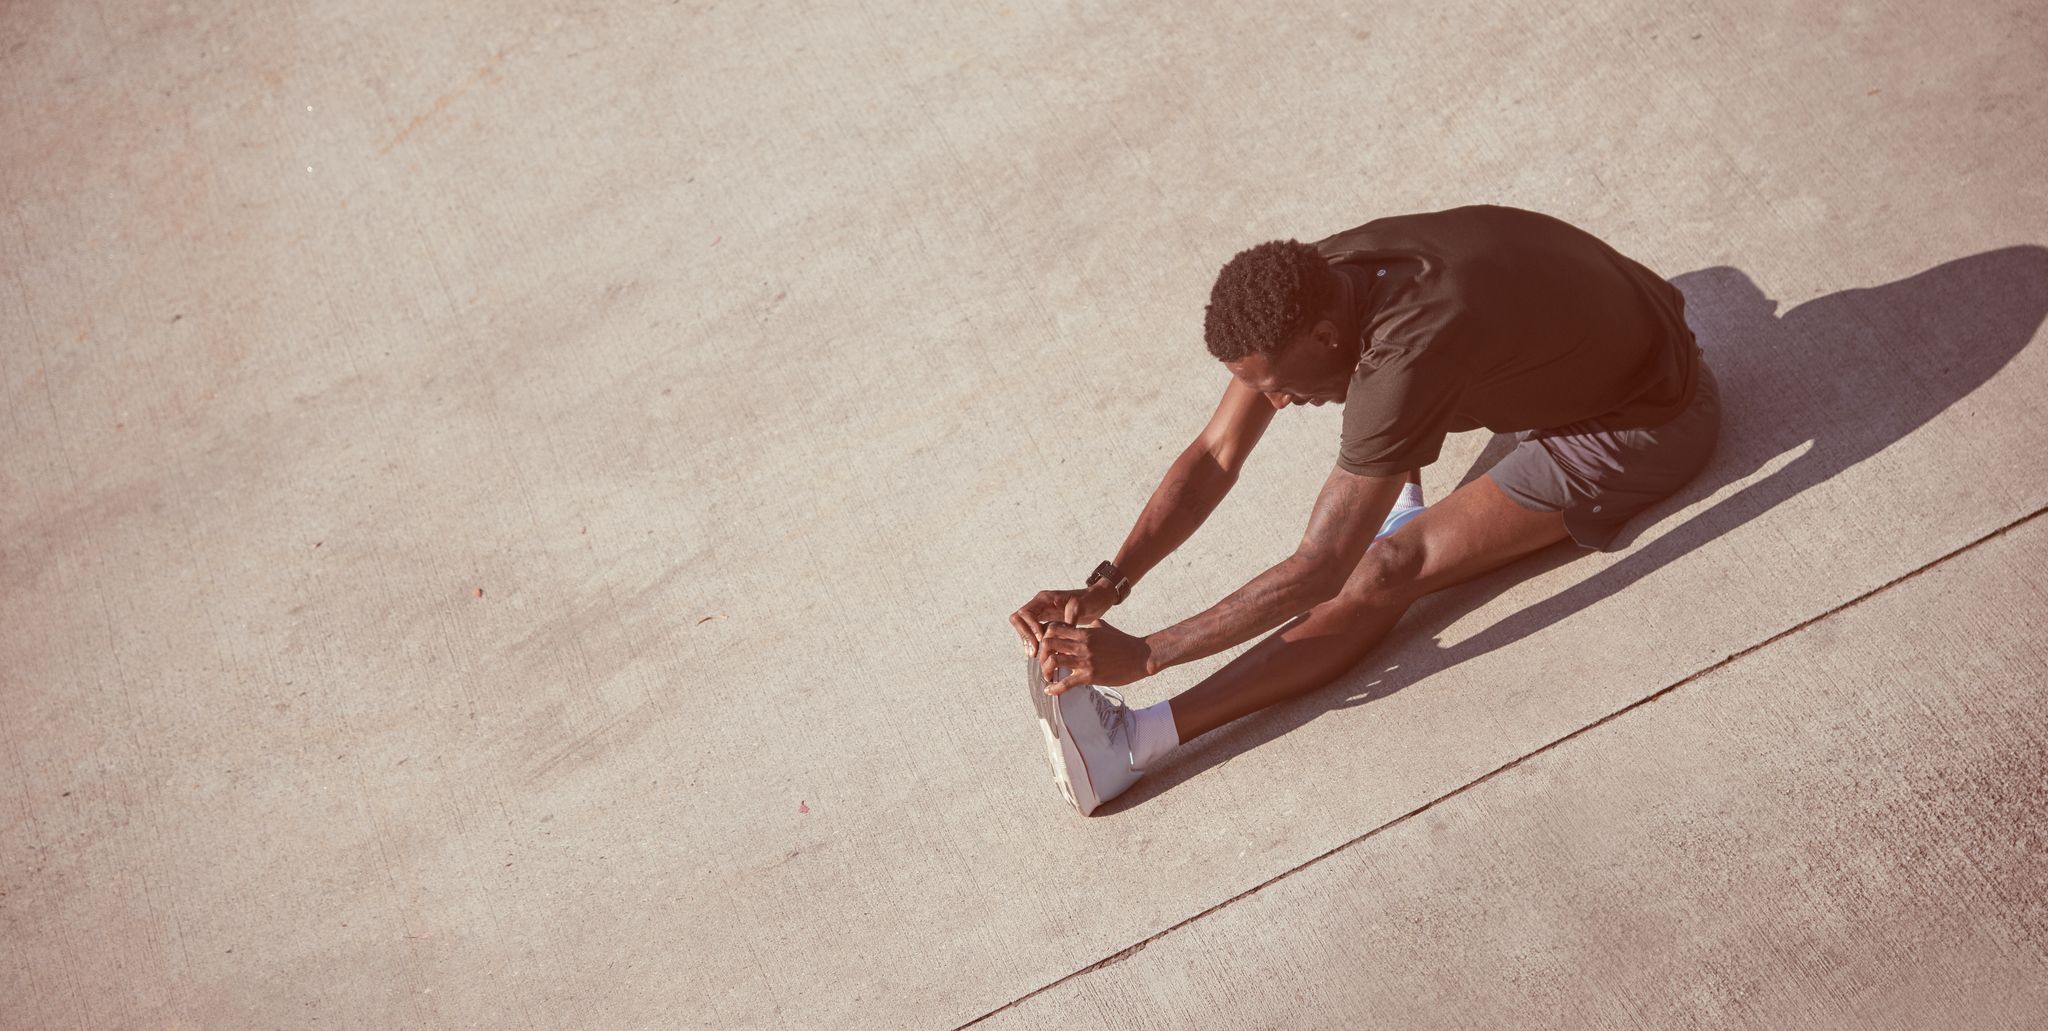 African American man stretches on pavement